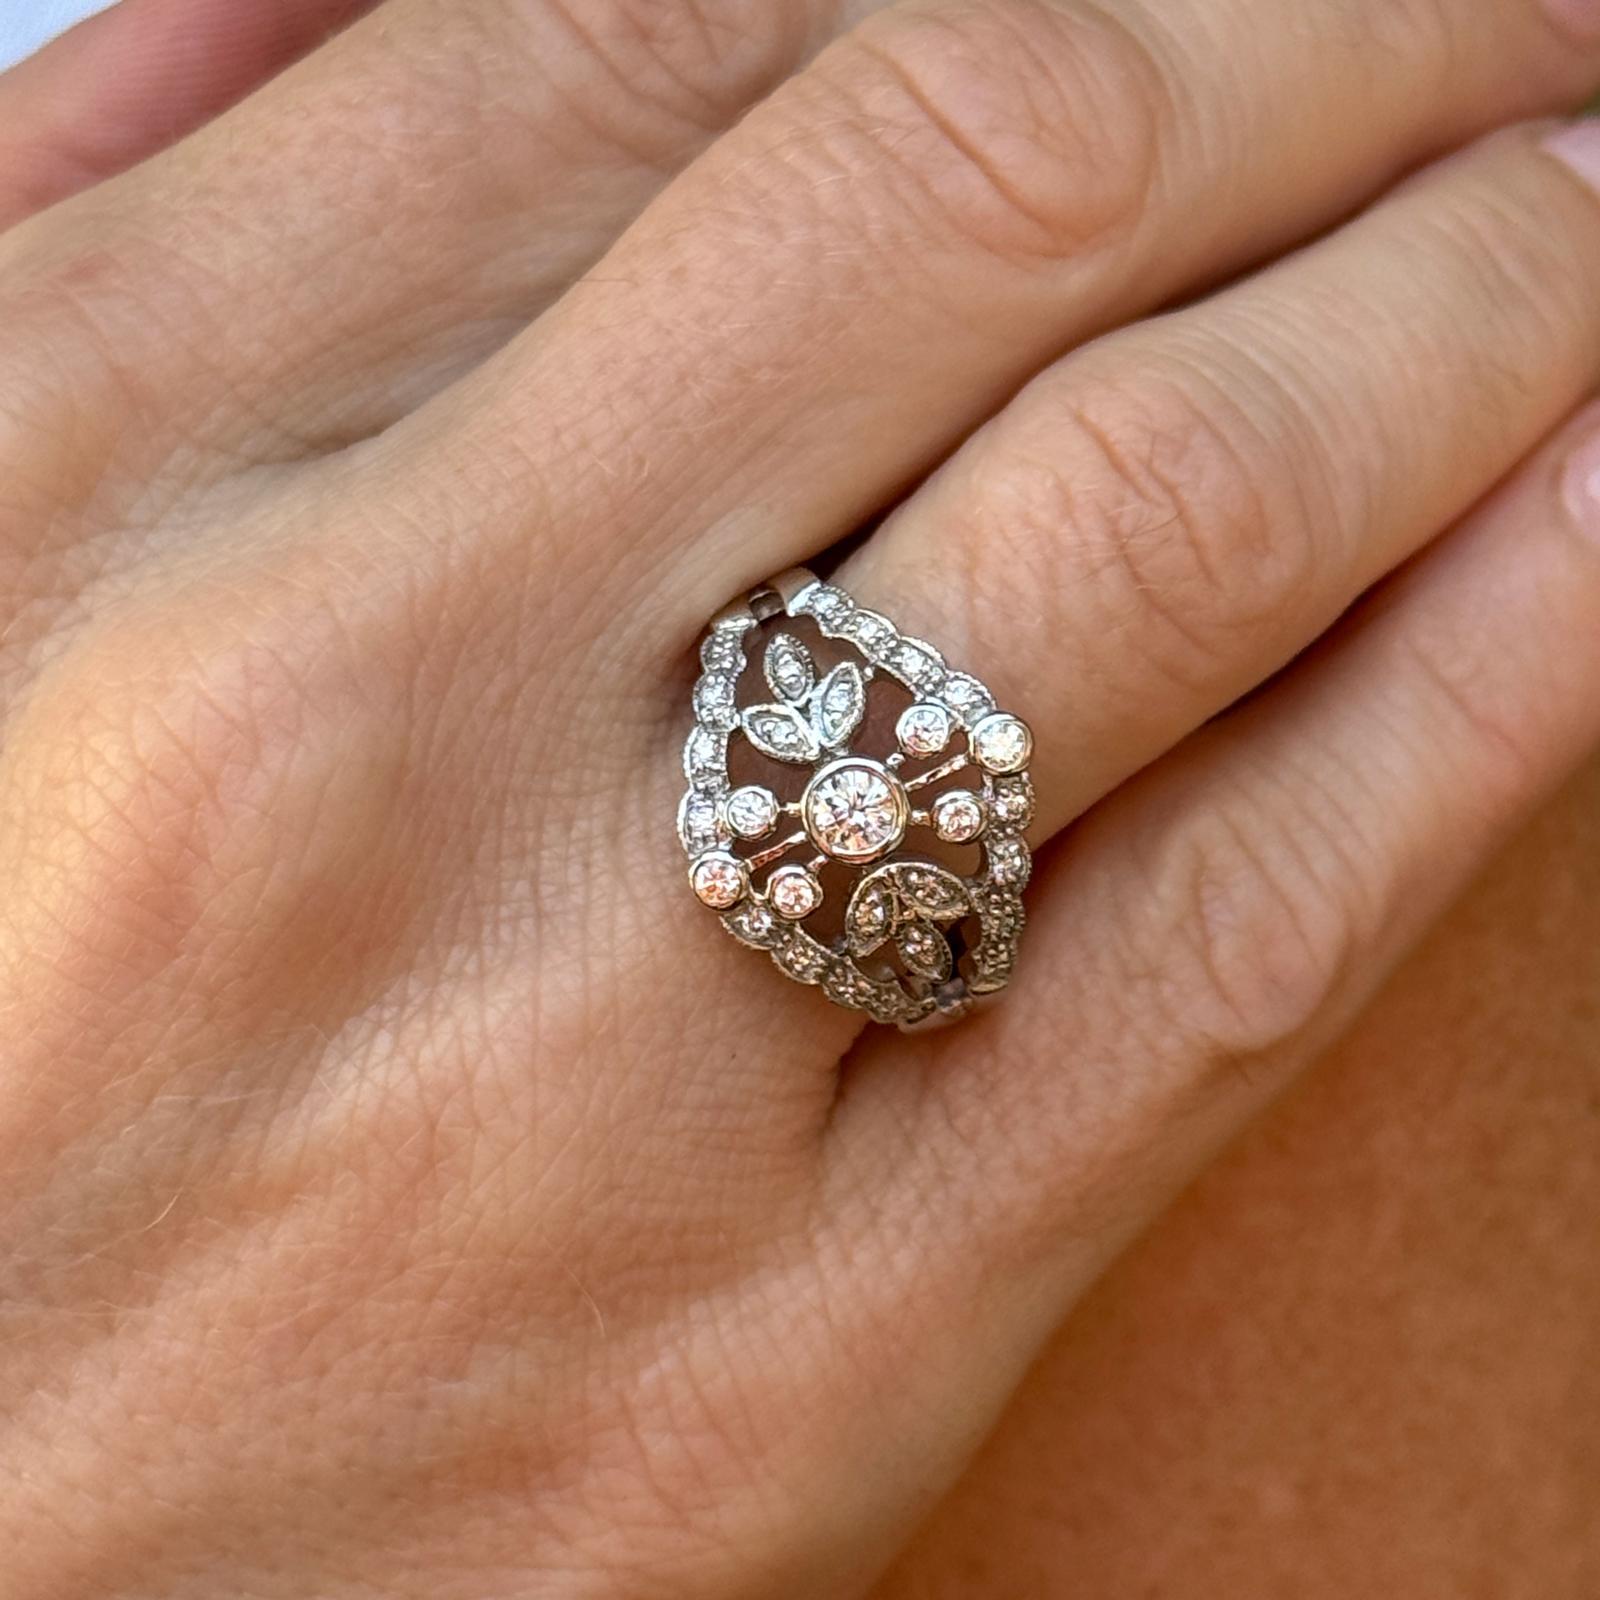 1960's diamond filigree estate ring handcrafted in 14 karat white gold. The ring features 29 round brilliant cut diamonds weighing approximately .50 carat total weight and graded E-F color and VS clarity. The ring measures 16.5mm in width (on top),